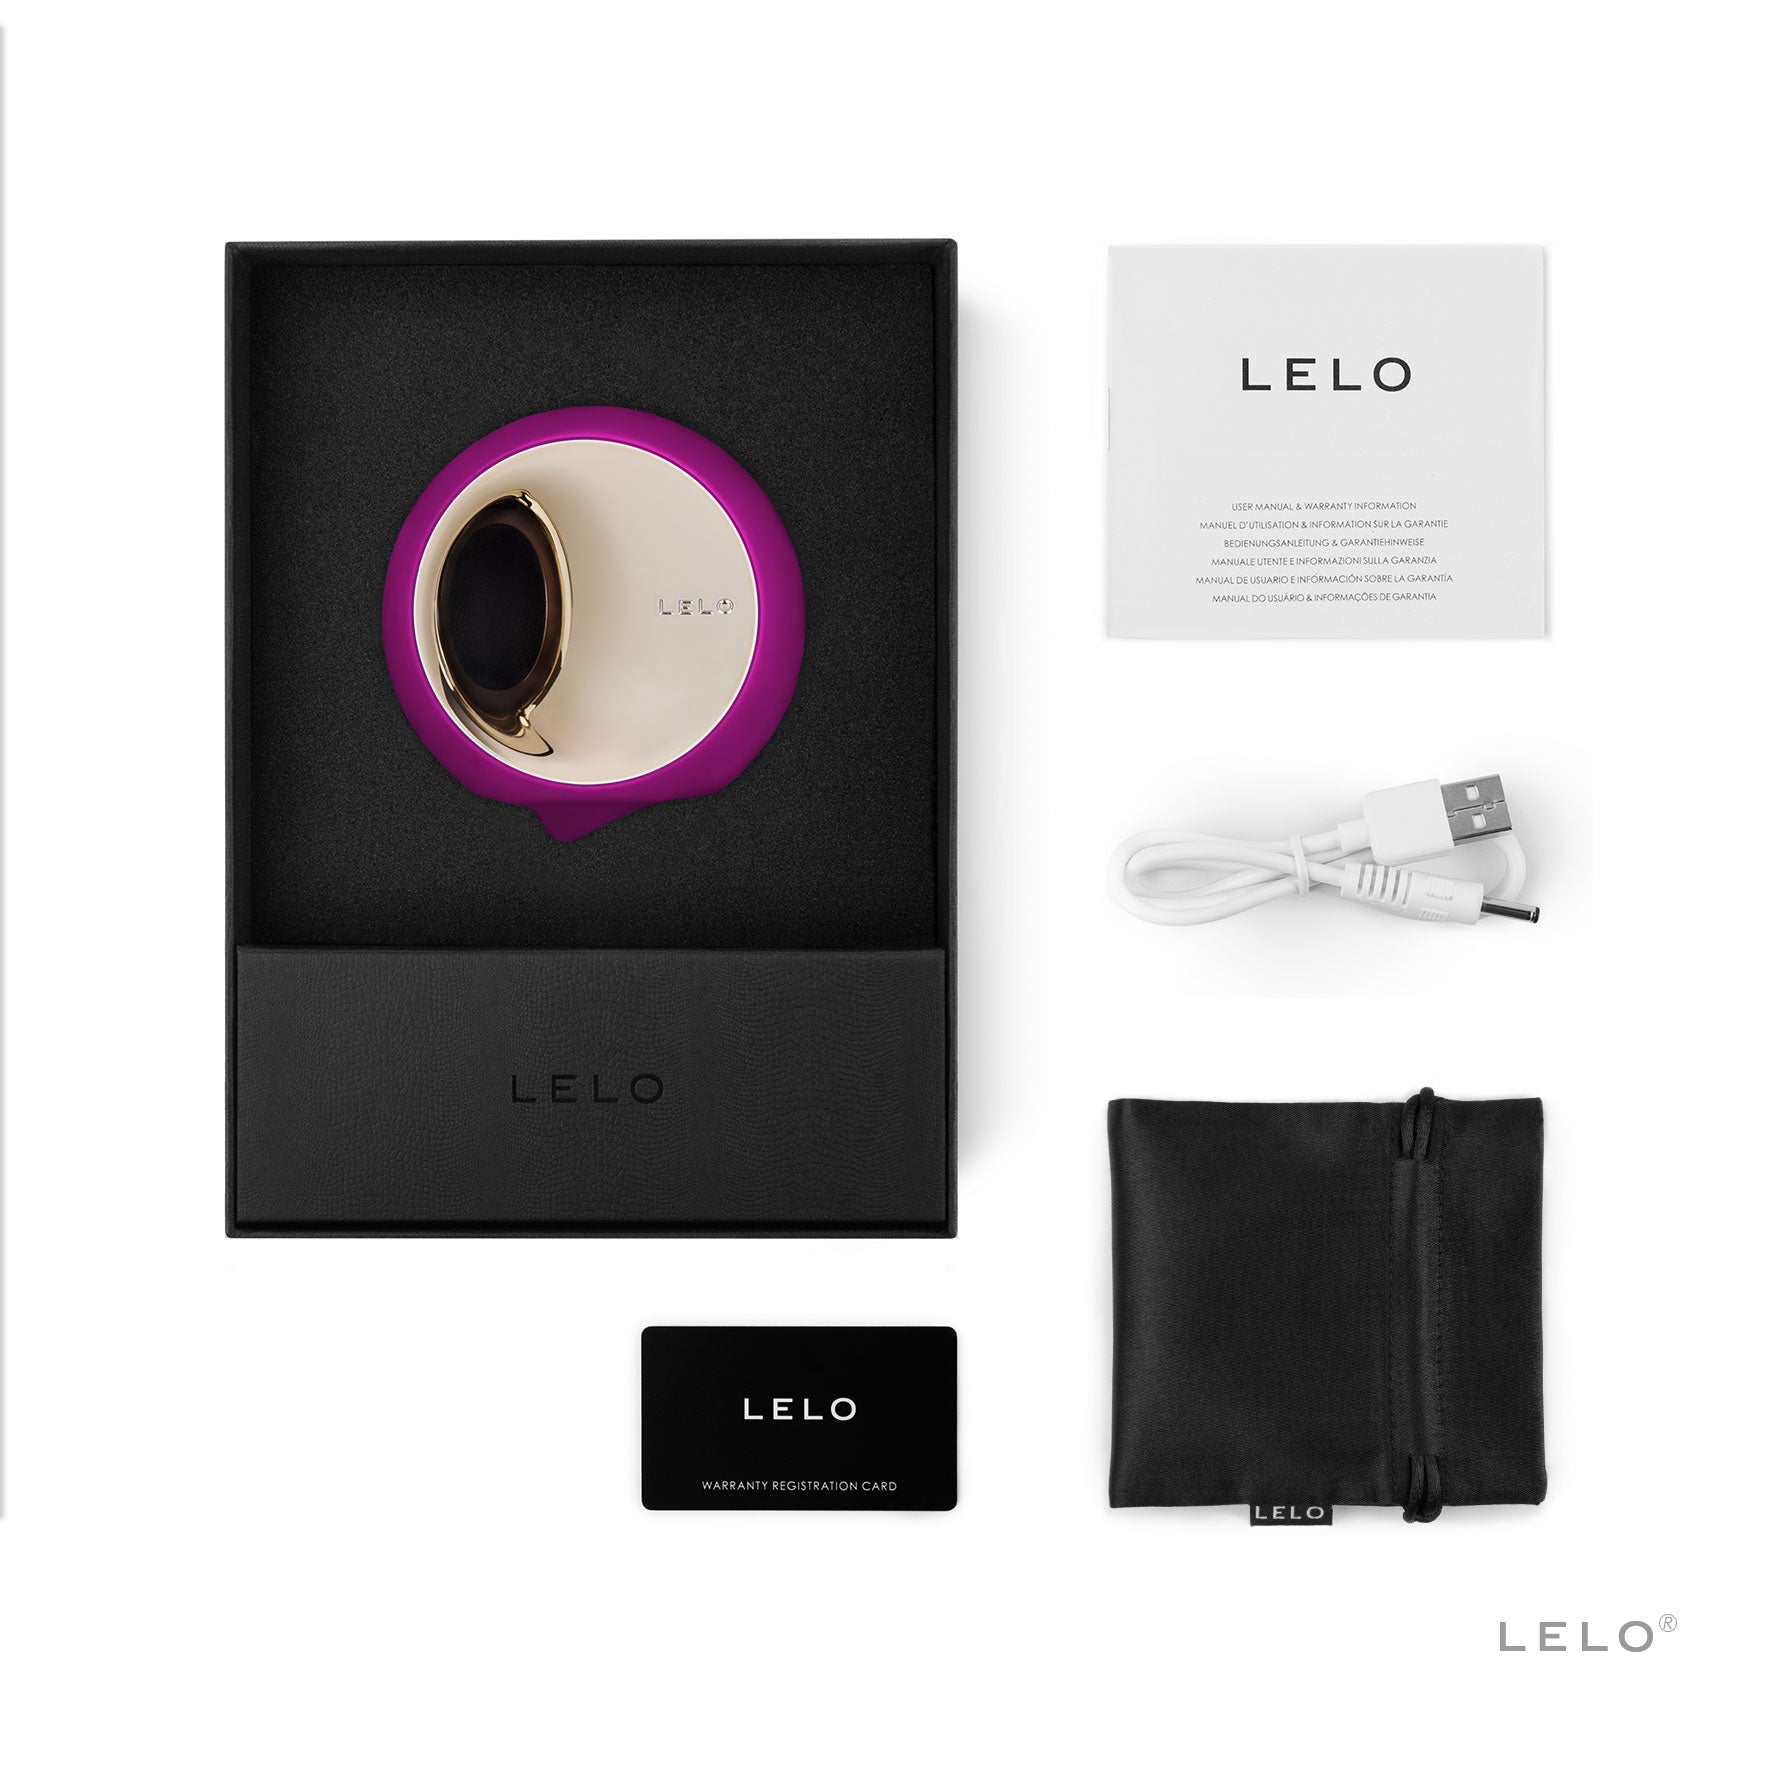 LELO Ora 3 Deep Rose oral simulator shown in open box presentation with USB charging cable and storage bag